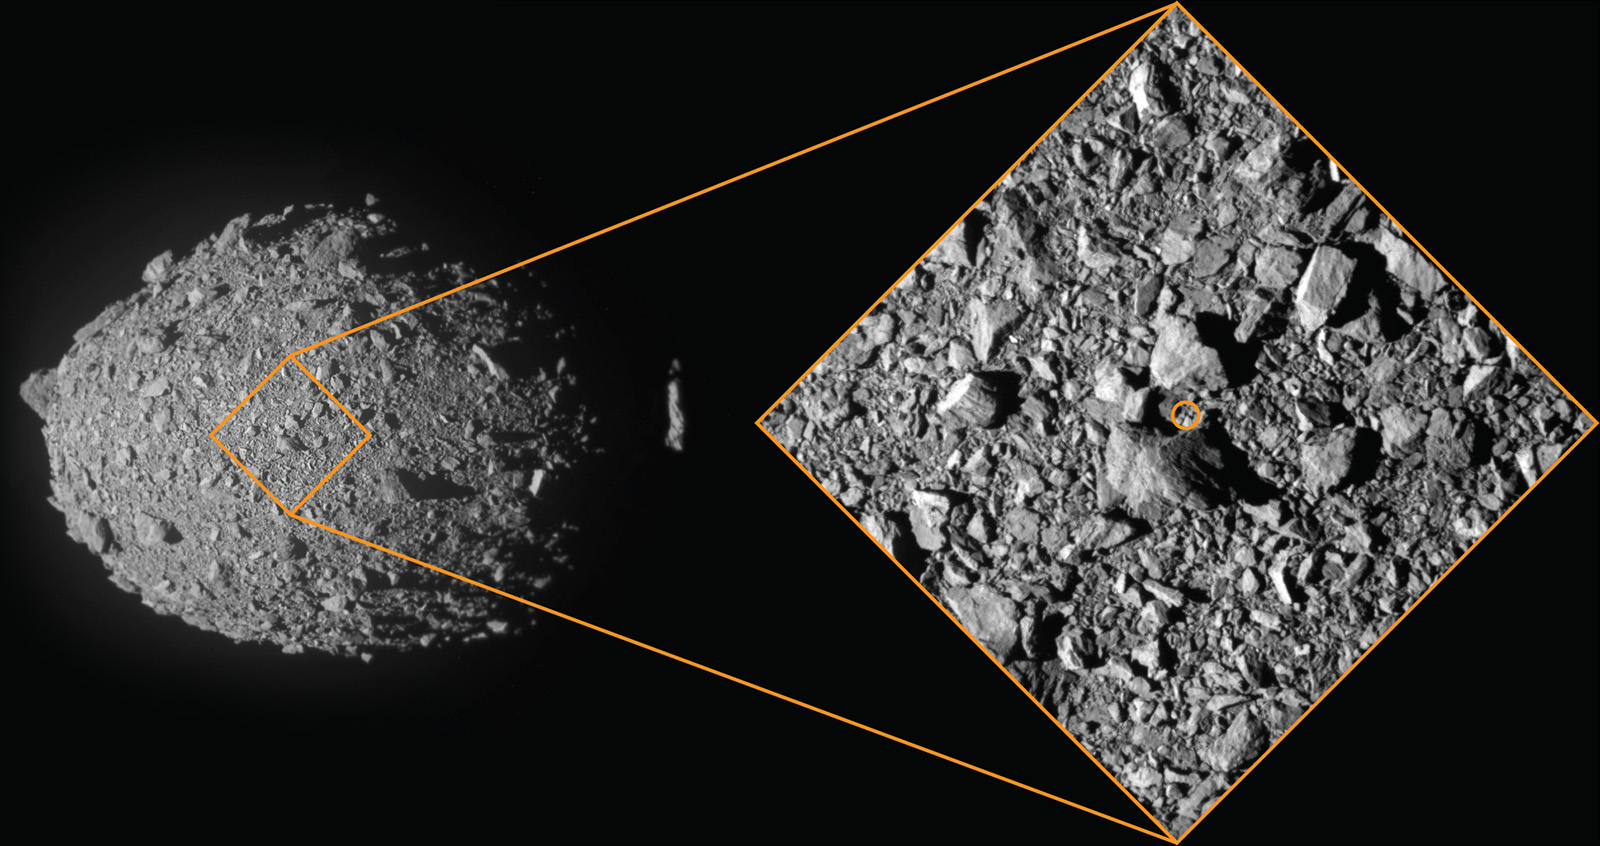 Two black-and-white photographs show (1) the full rock-strewn, egg-shaped Dimorphis asteroid, and (2) a close-up of the jumbled-rock Dimorphos surface. The rocks vary in size and are not smoothed or worn. This is a classic 